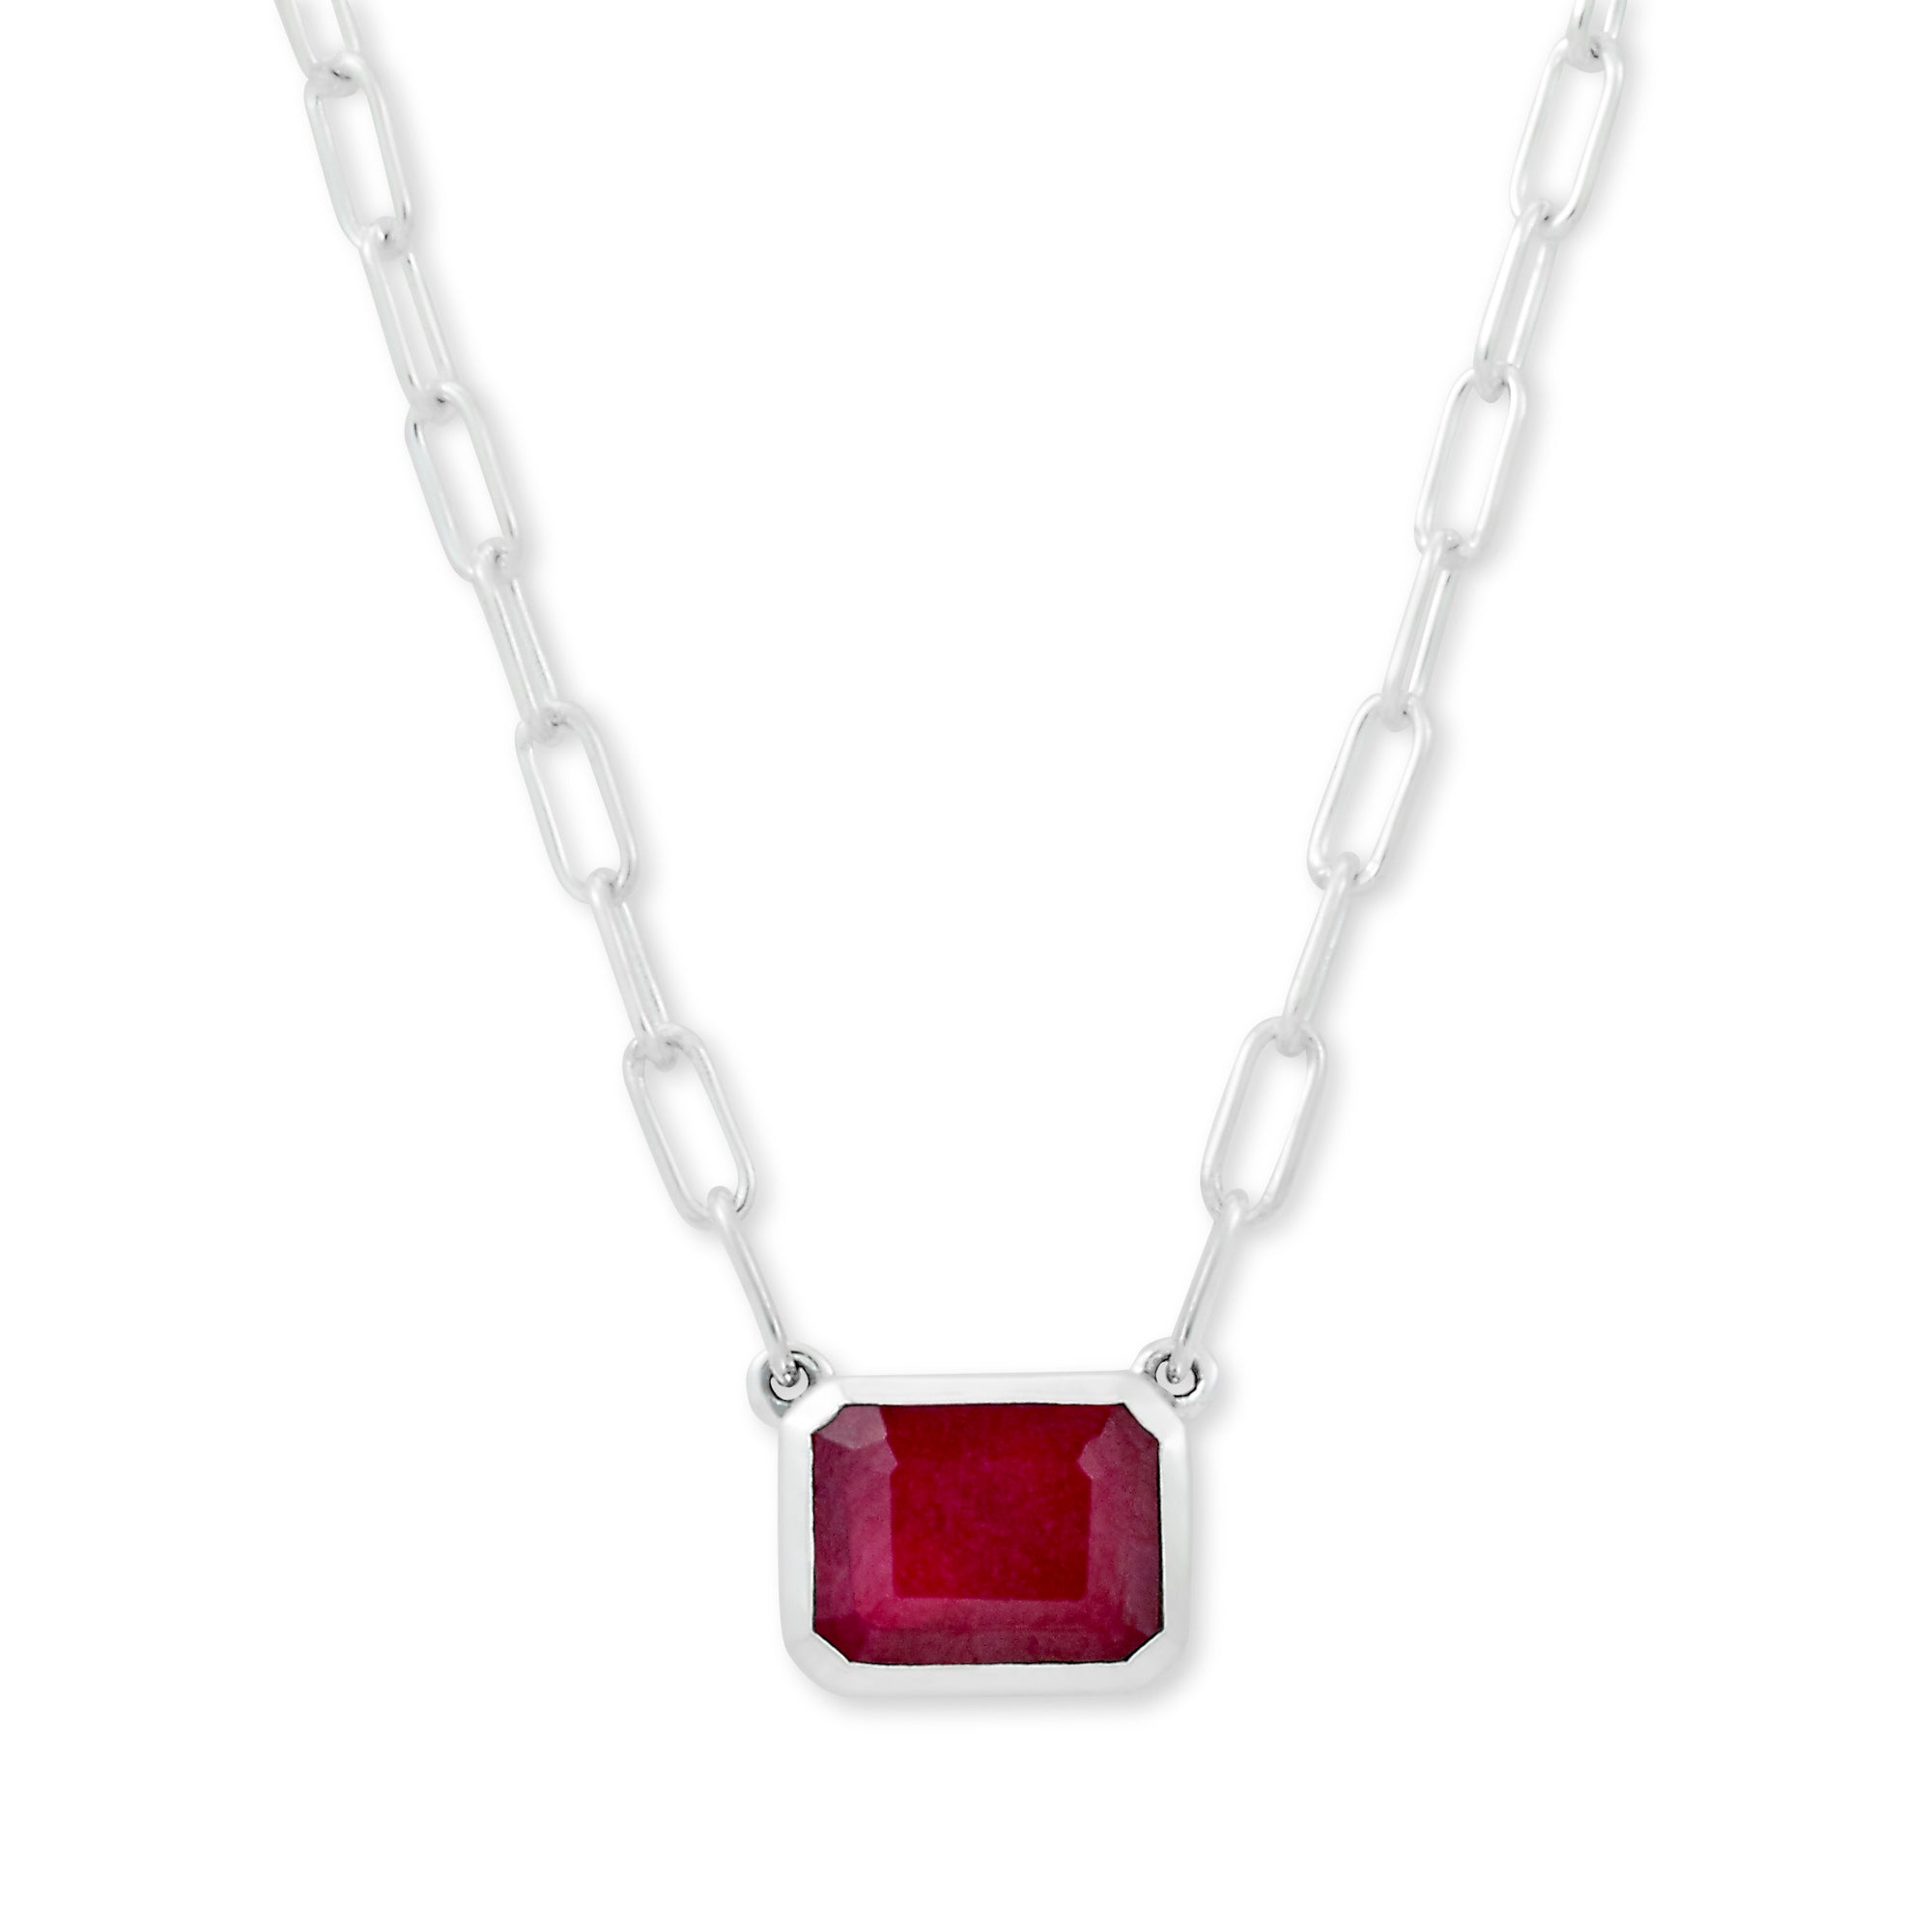 Ruby Eirini Necklace available at Talisman Collection Fine Jewelers in El Dorado Hills, CA and online. Specs: Ruby Eirini Necklace features an emerald-cut ruby solitaire measuring 7x9mm and is set in Sterling Silver.